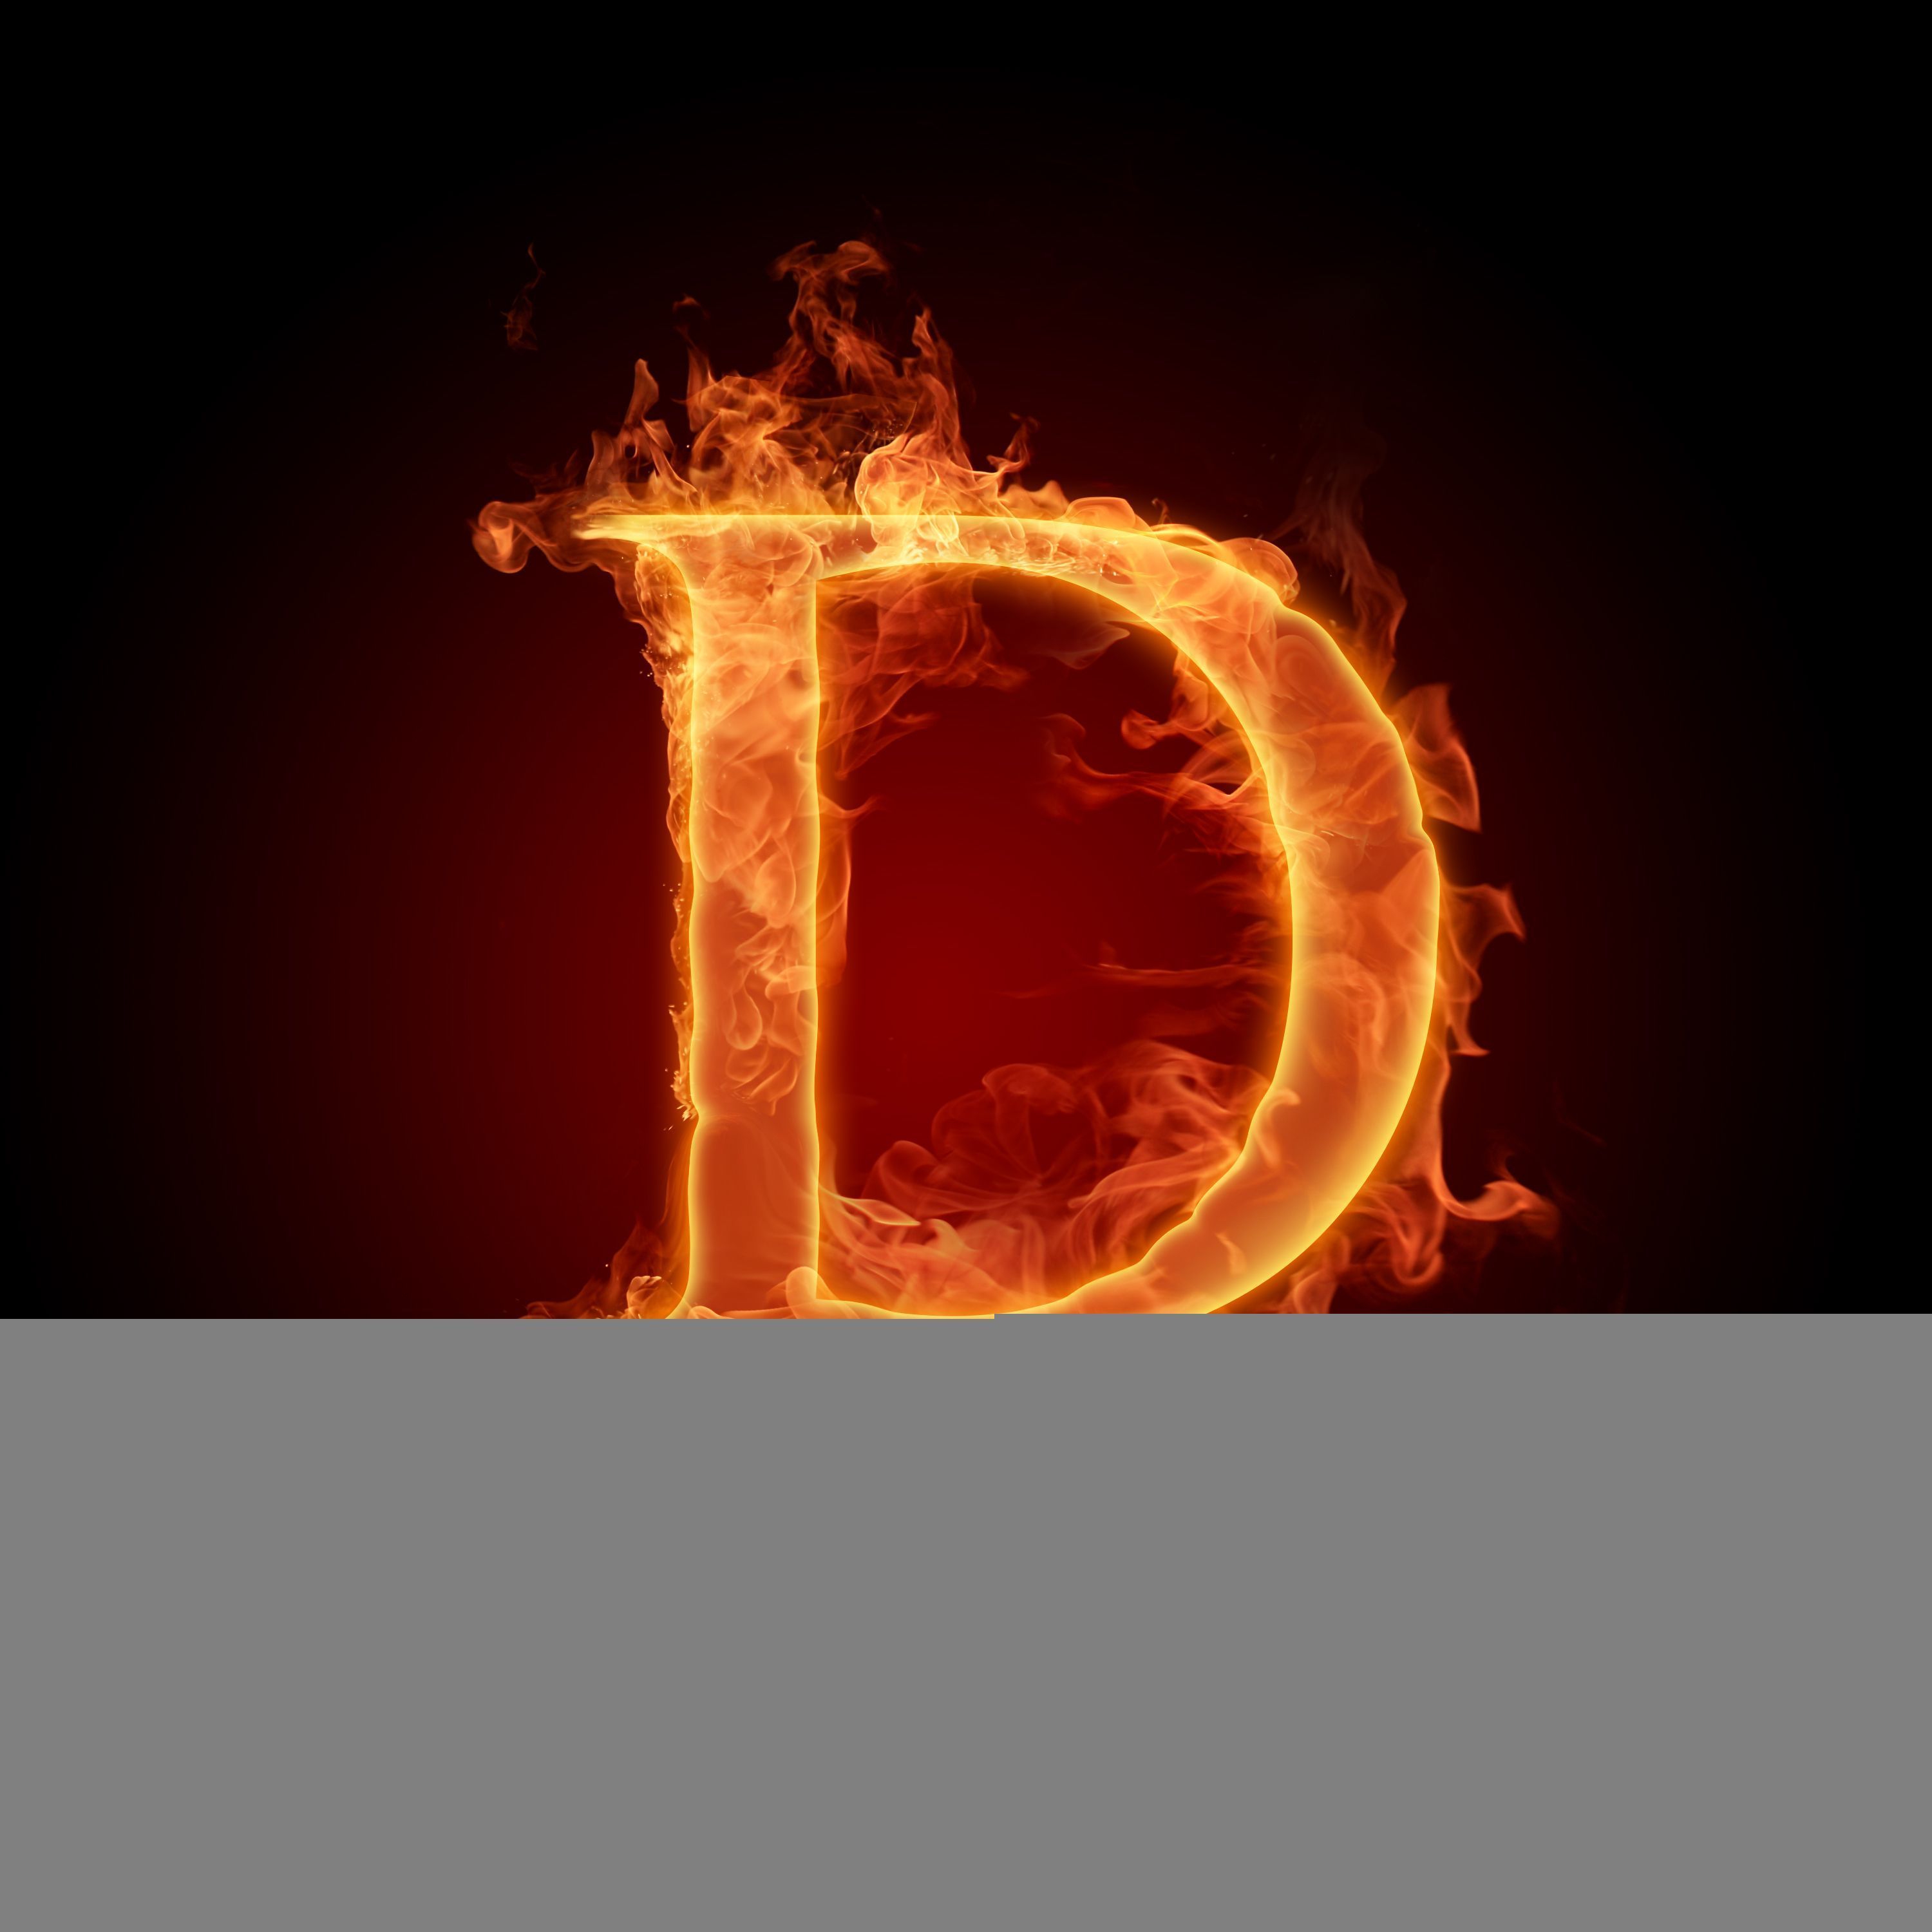 M Fire Letters HD Wallpapers | Only hd wallpapers